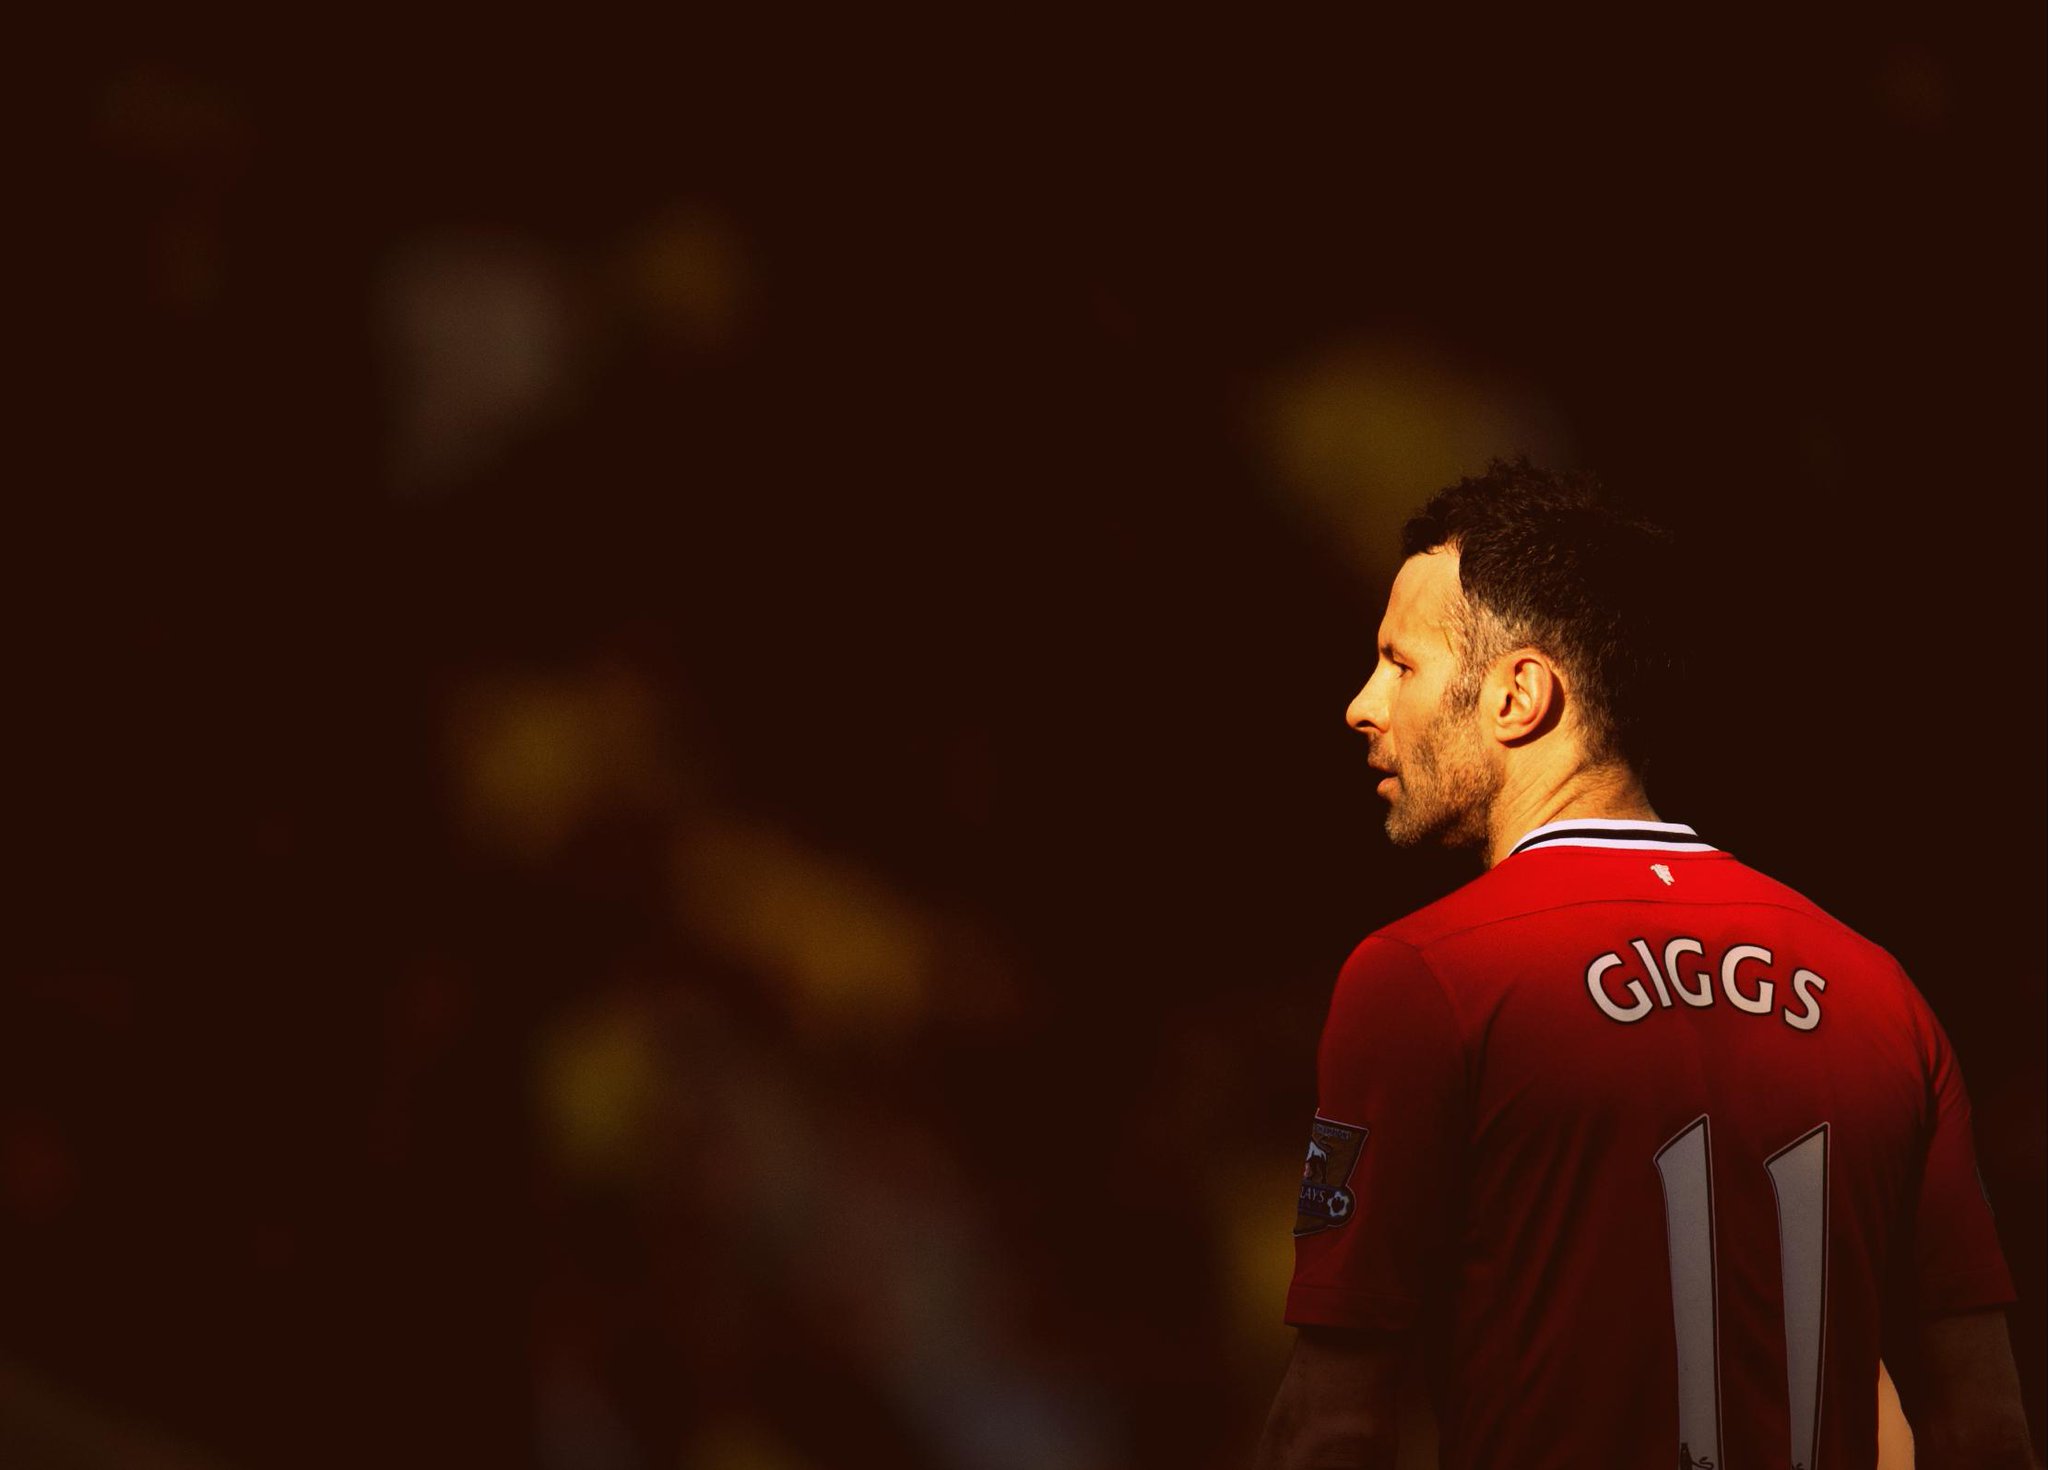 I have only one word for him, a true LEGEND. 
Happy 41st birthday to the Son of Man United, RYAN GIGGS. 